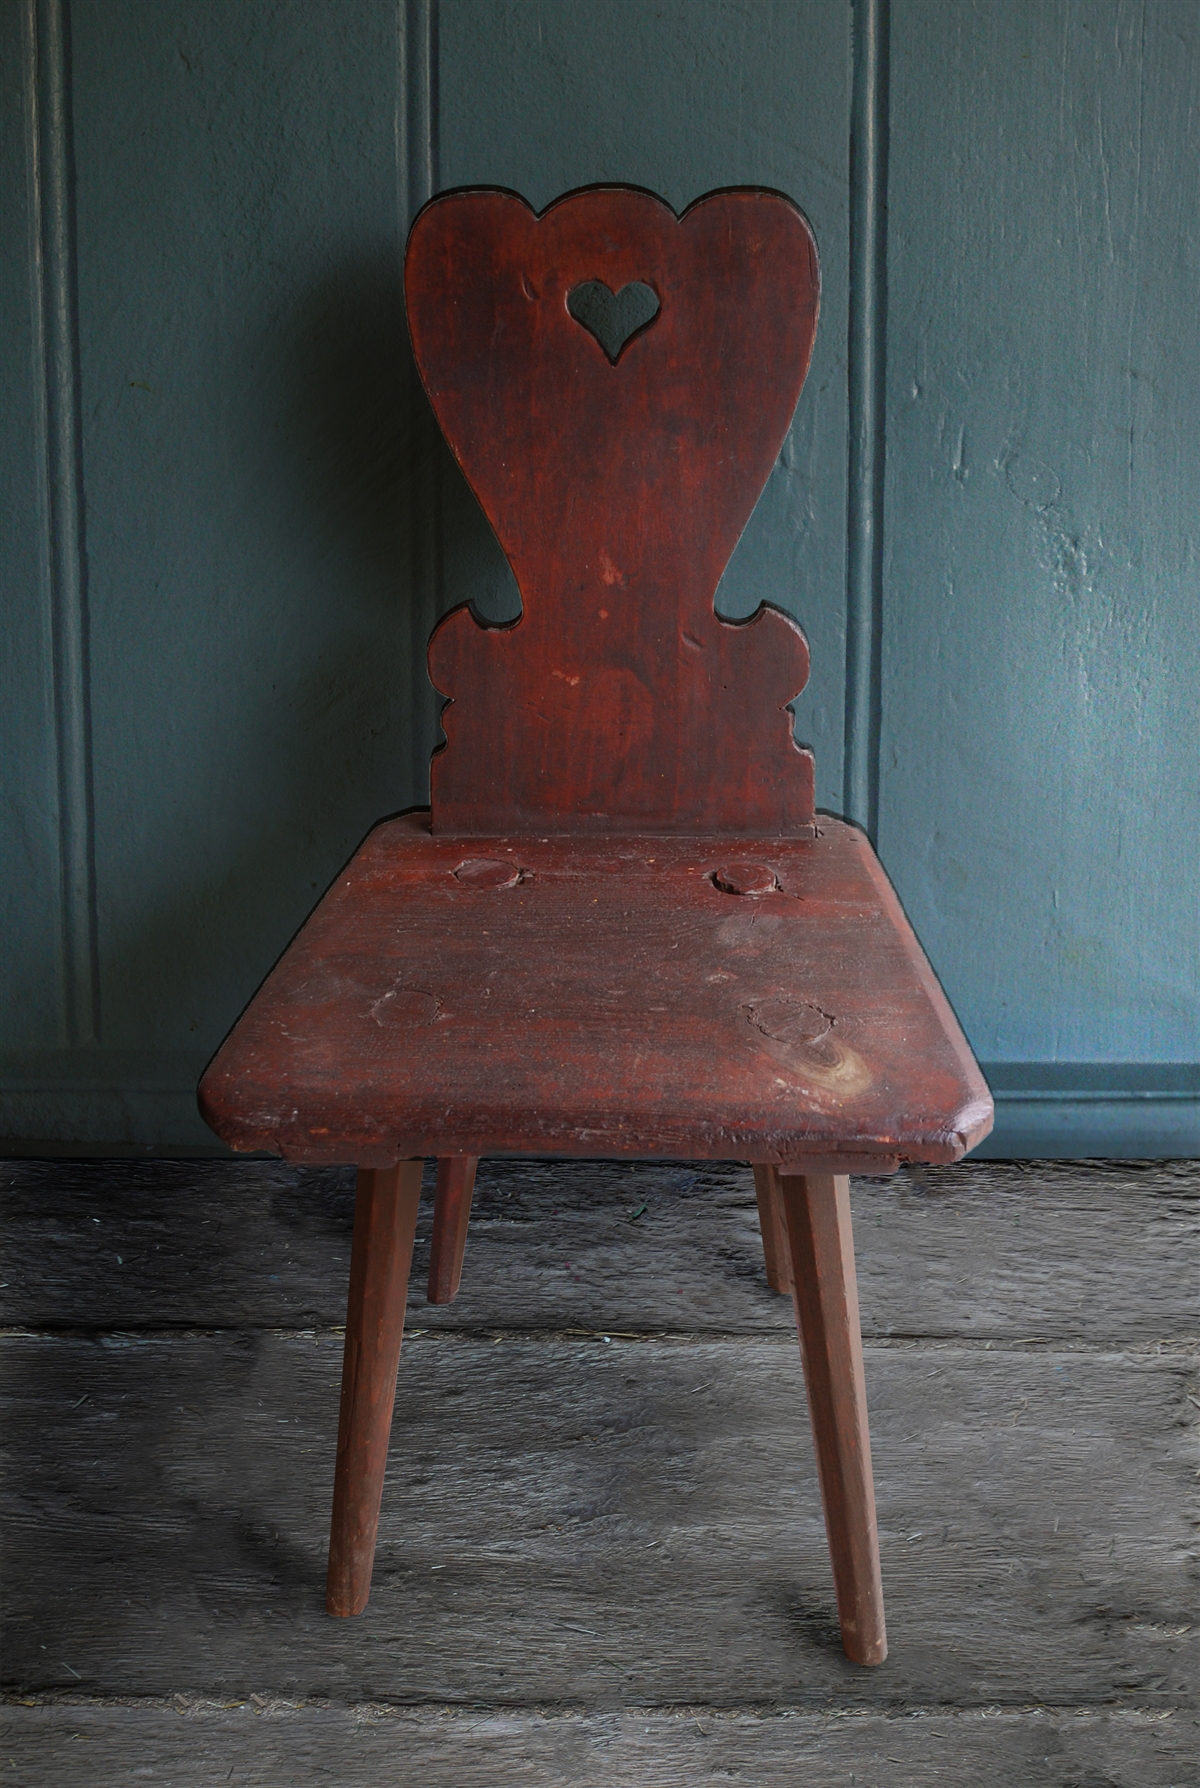 A small wooden chair with four legs, a square seat, and a curved, carved back with a heart cutout at the top.